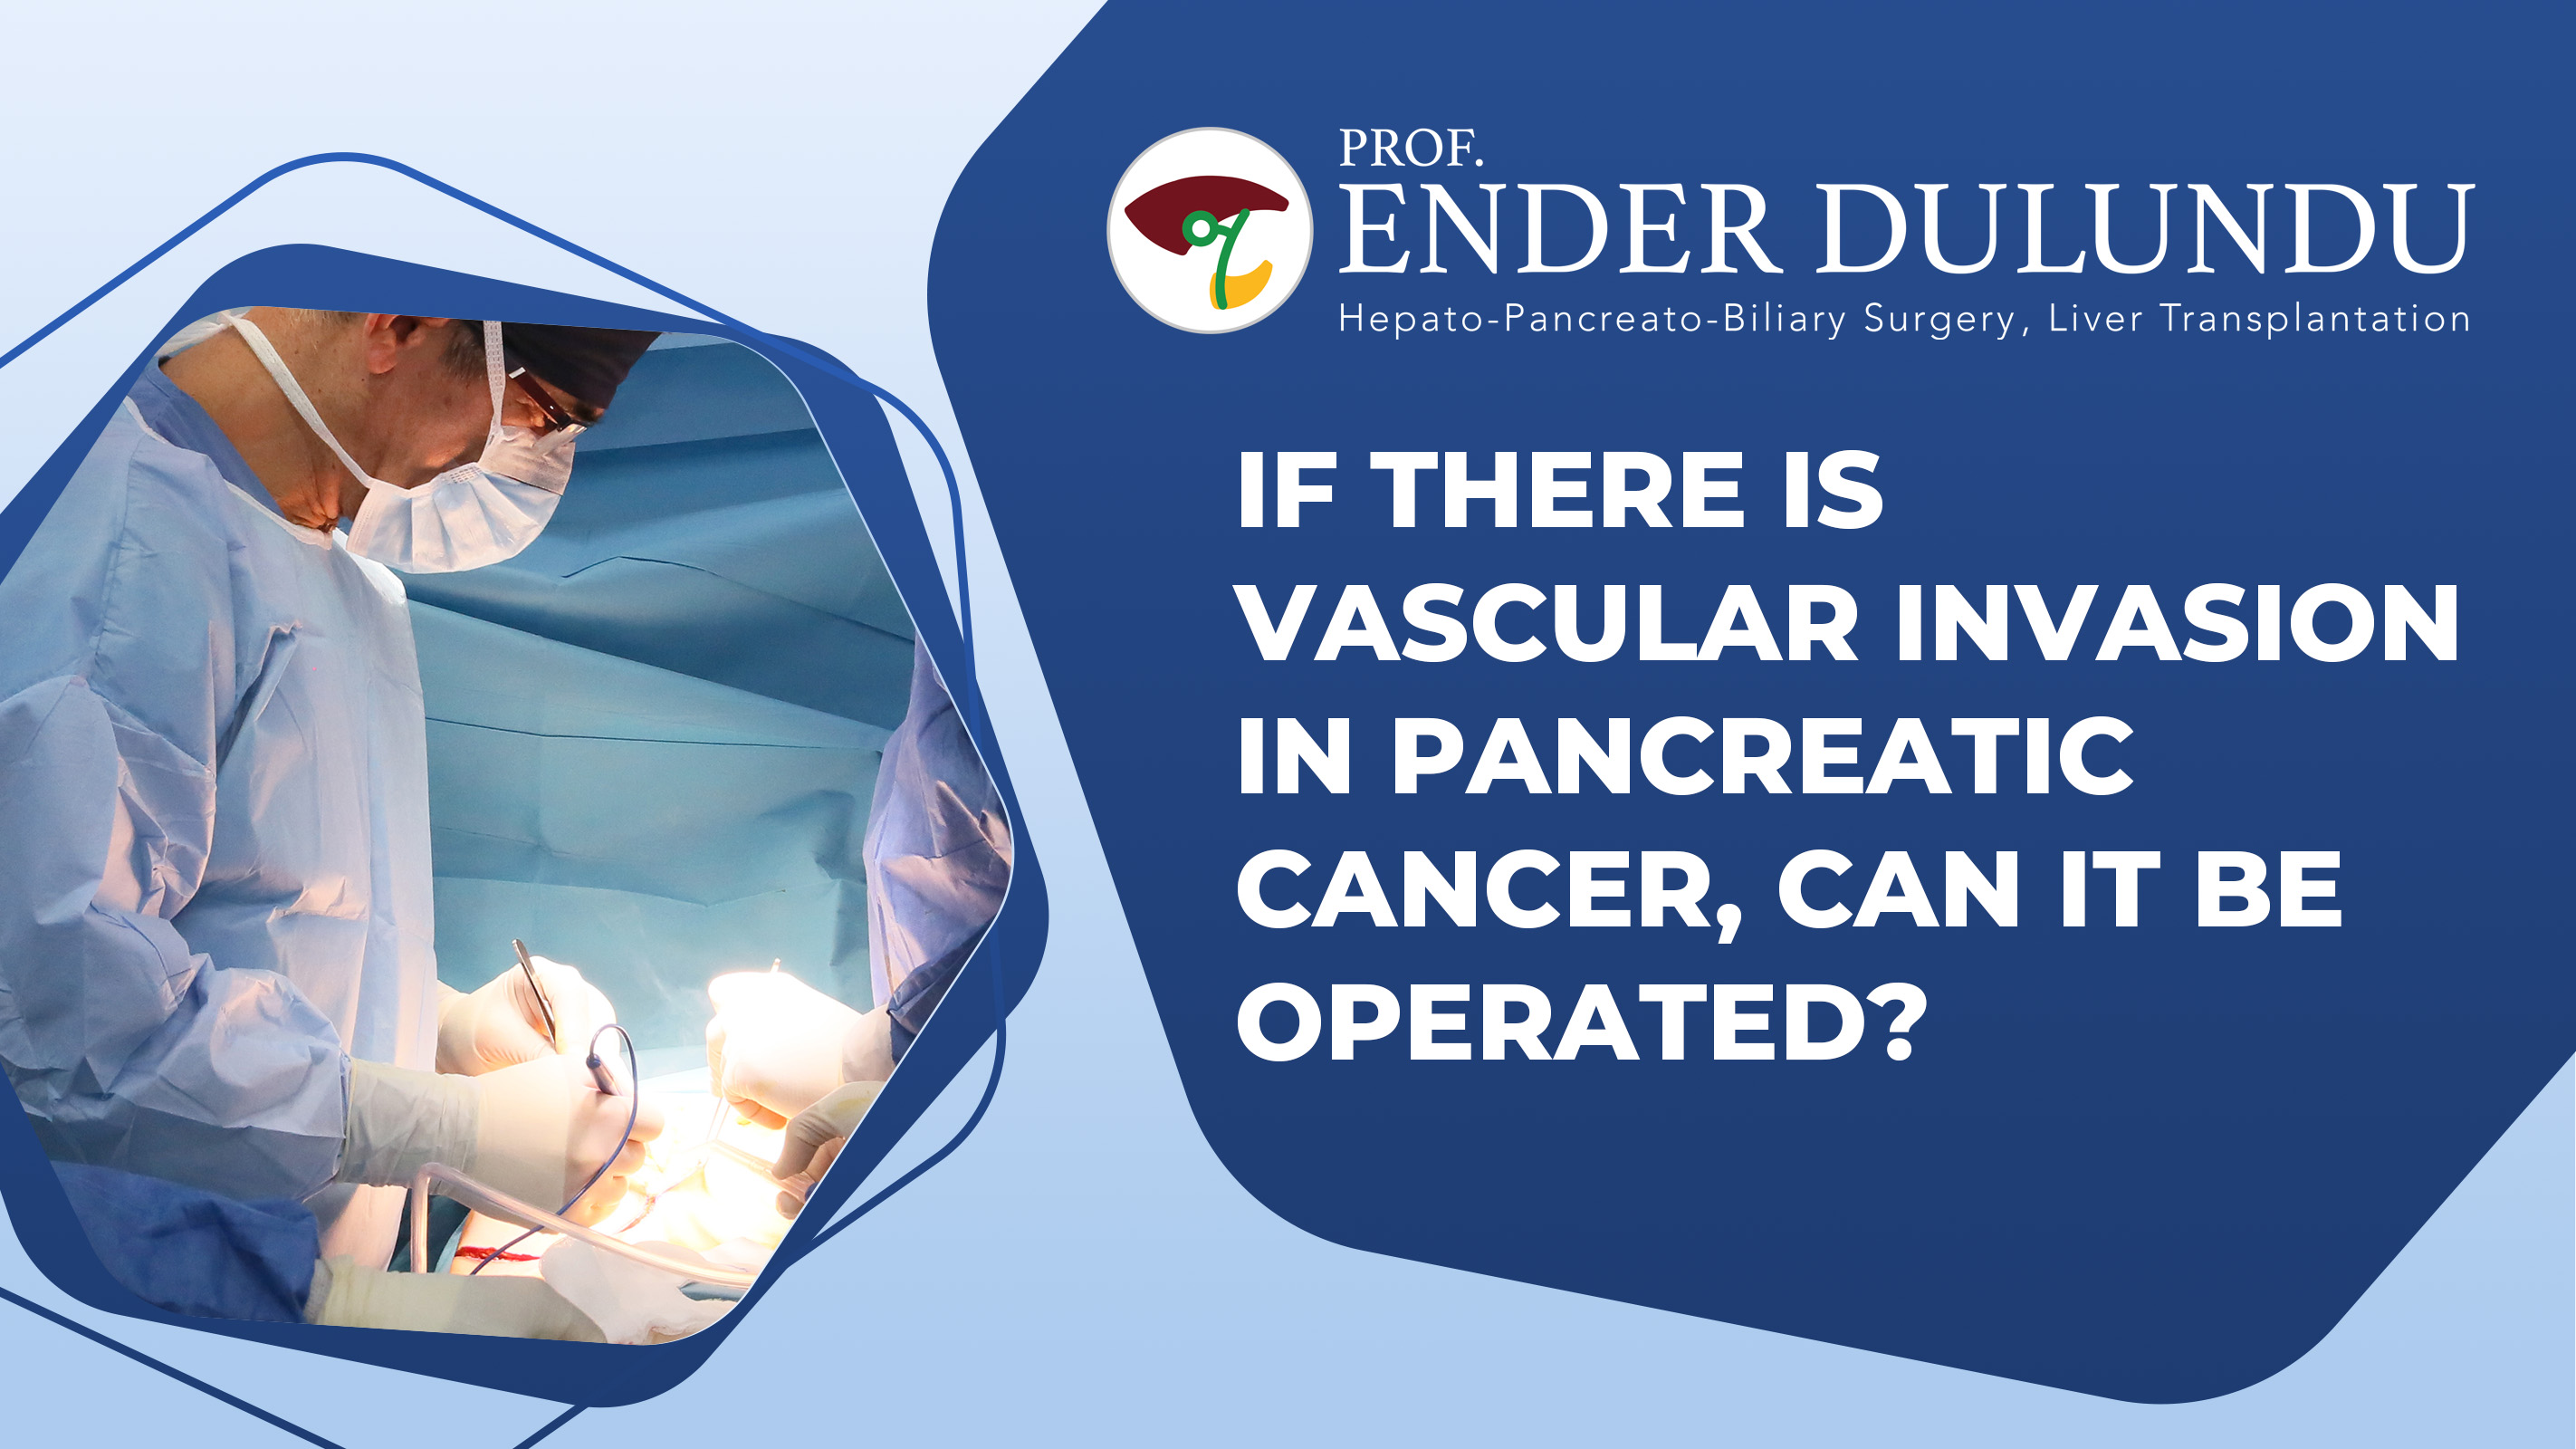 If There Is Vascular Invasion In Pancreatic Cancer, Can It Be Operated?